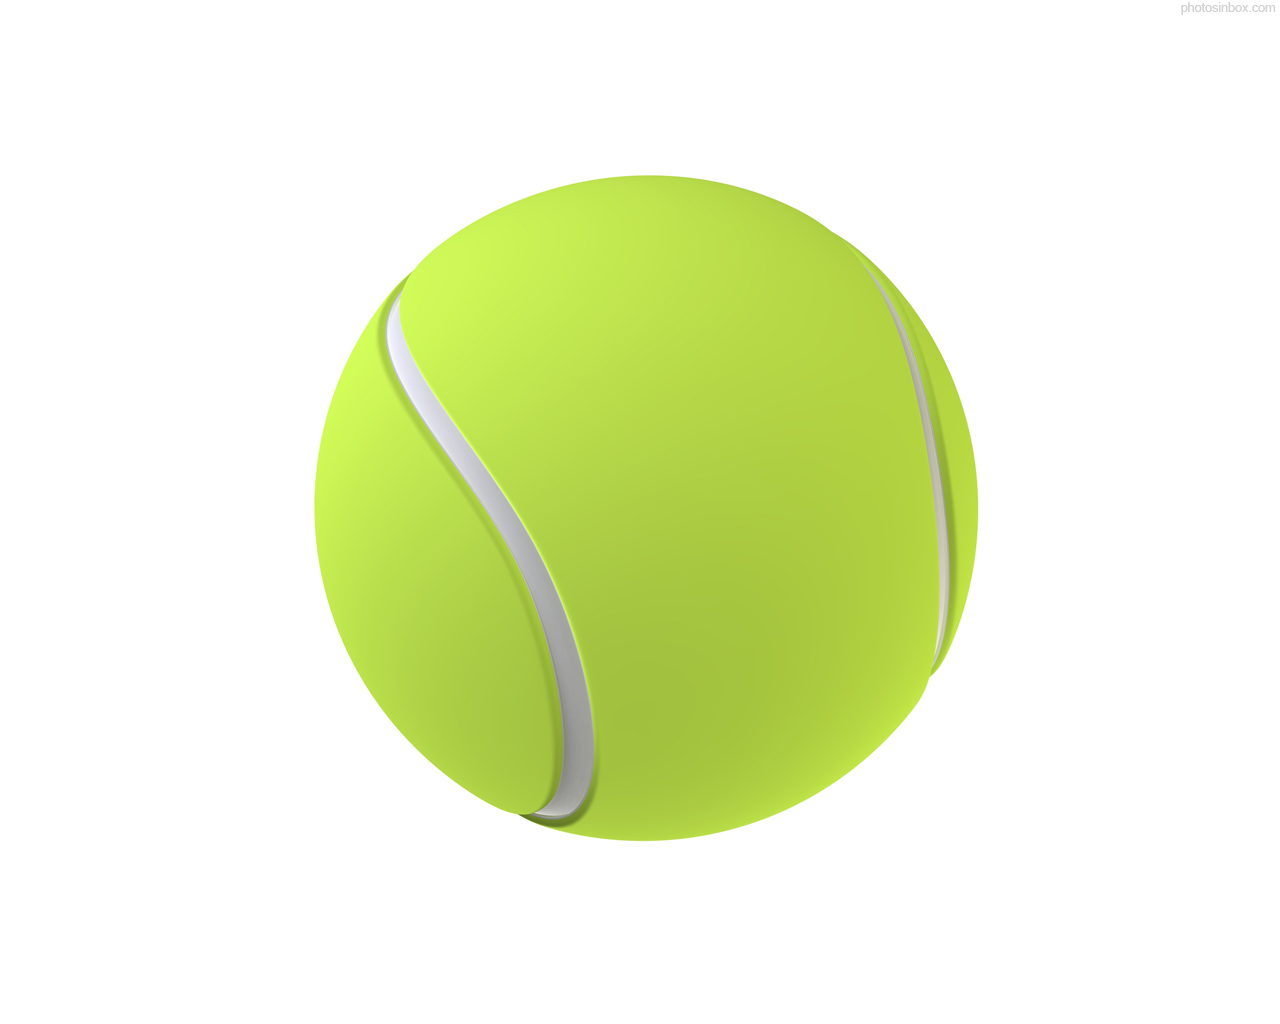 Isolated Tennis Ball Image   Vector Clip Art Online Royalty Free